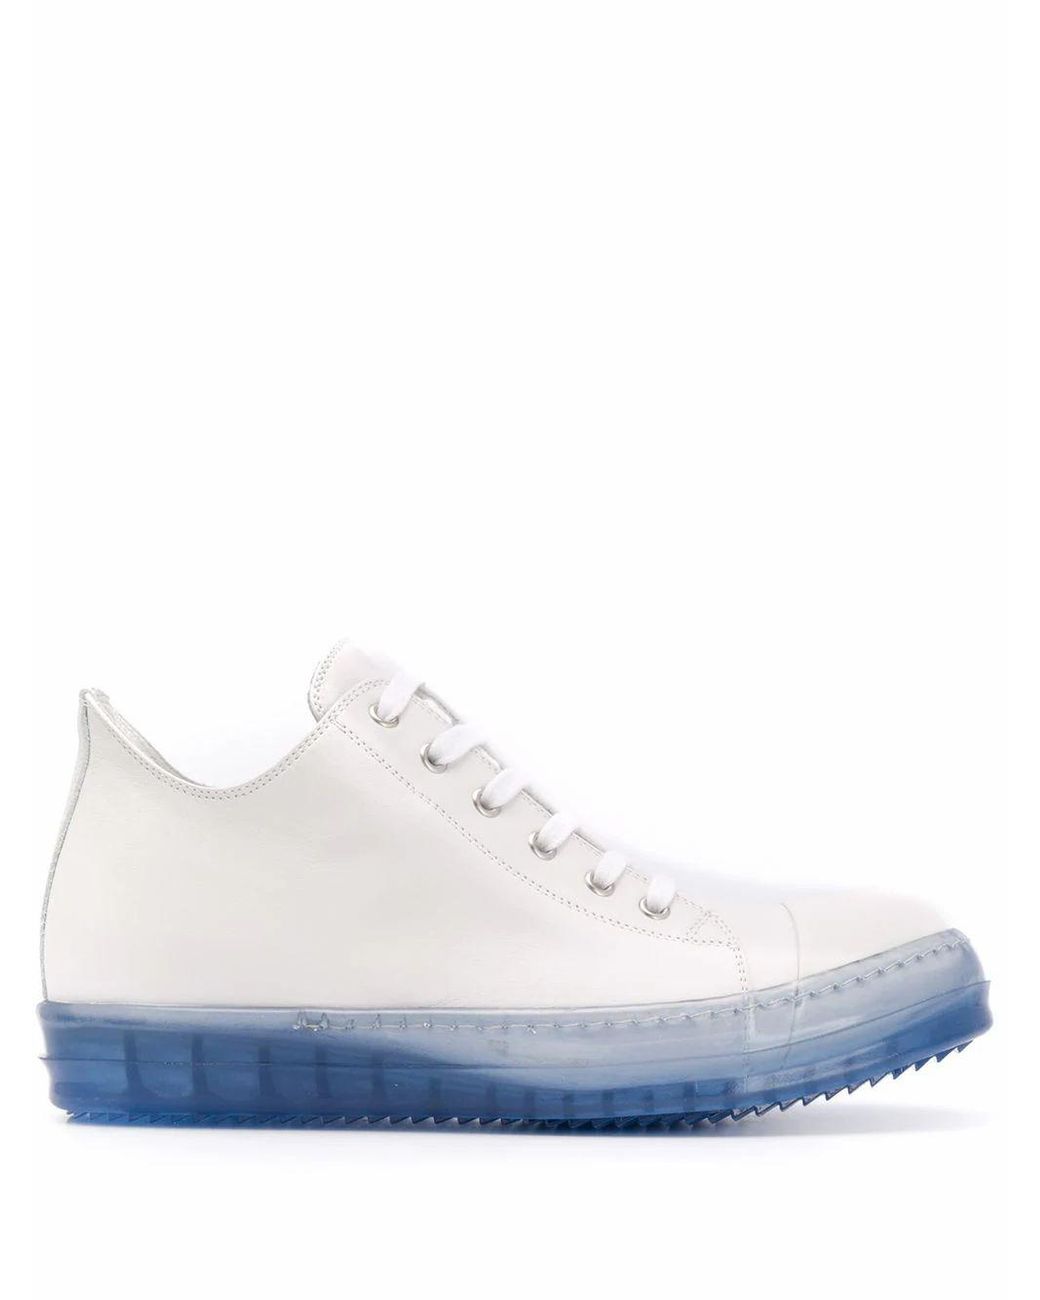 Rick Owens Leather Sneakers in White for Men - Lyst